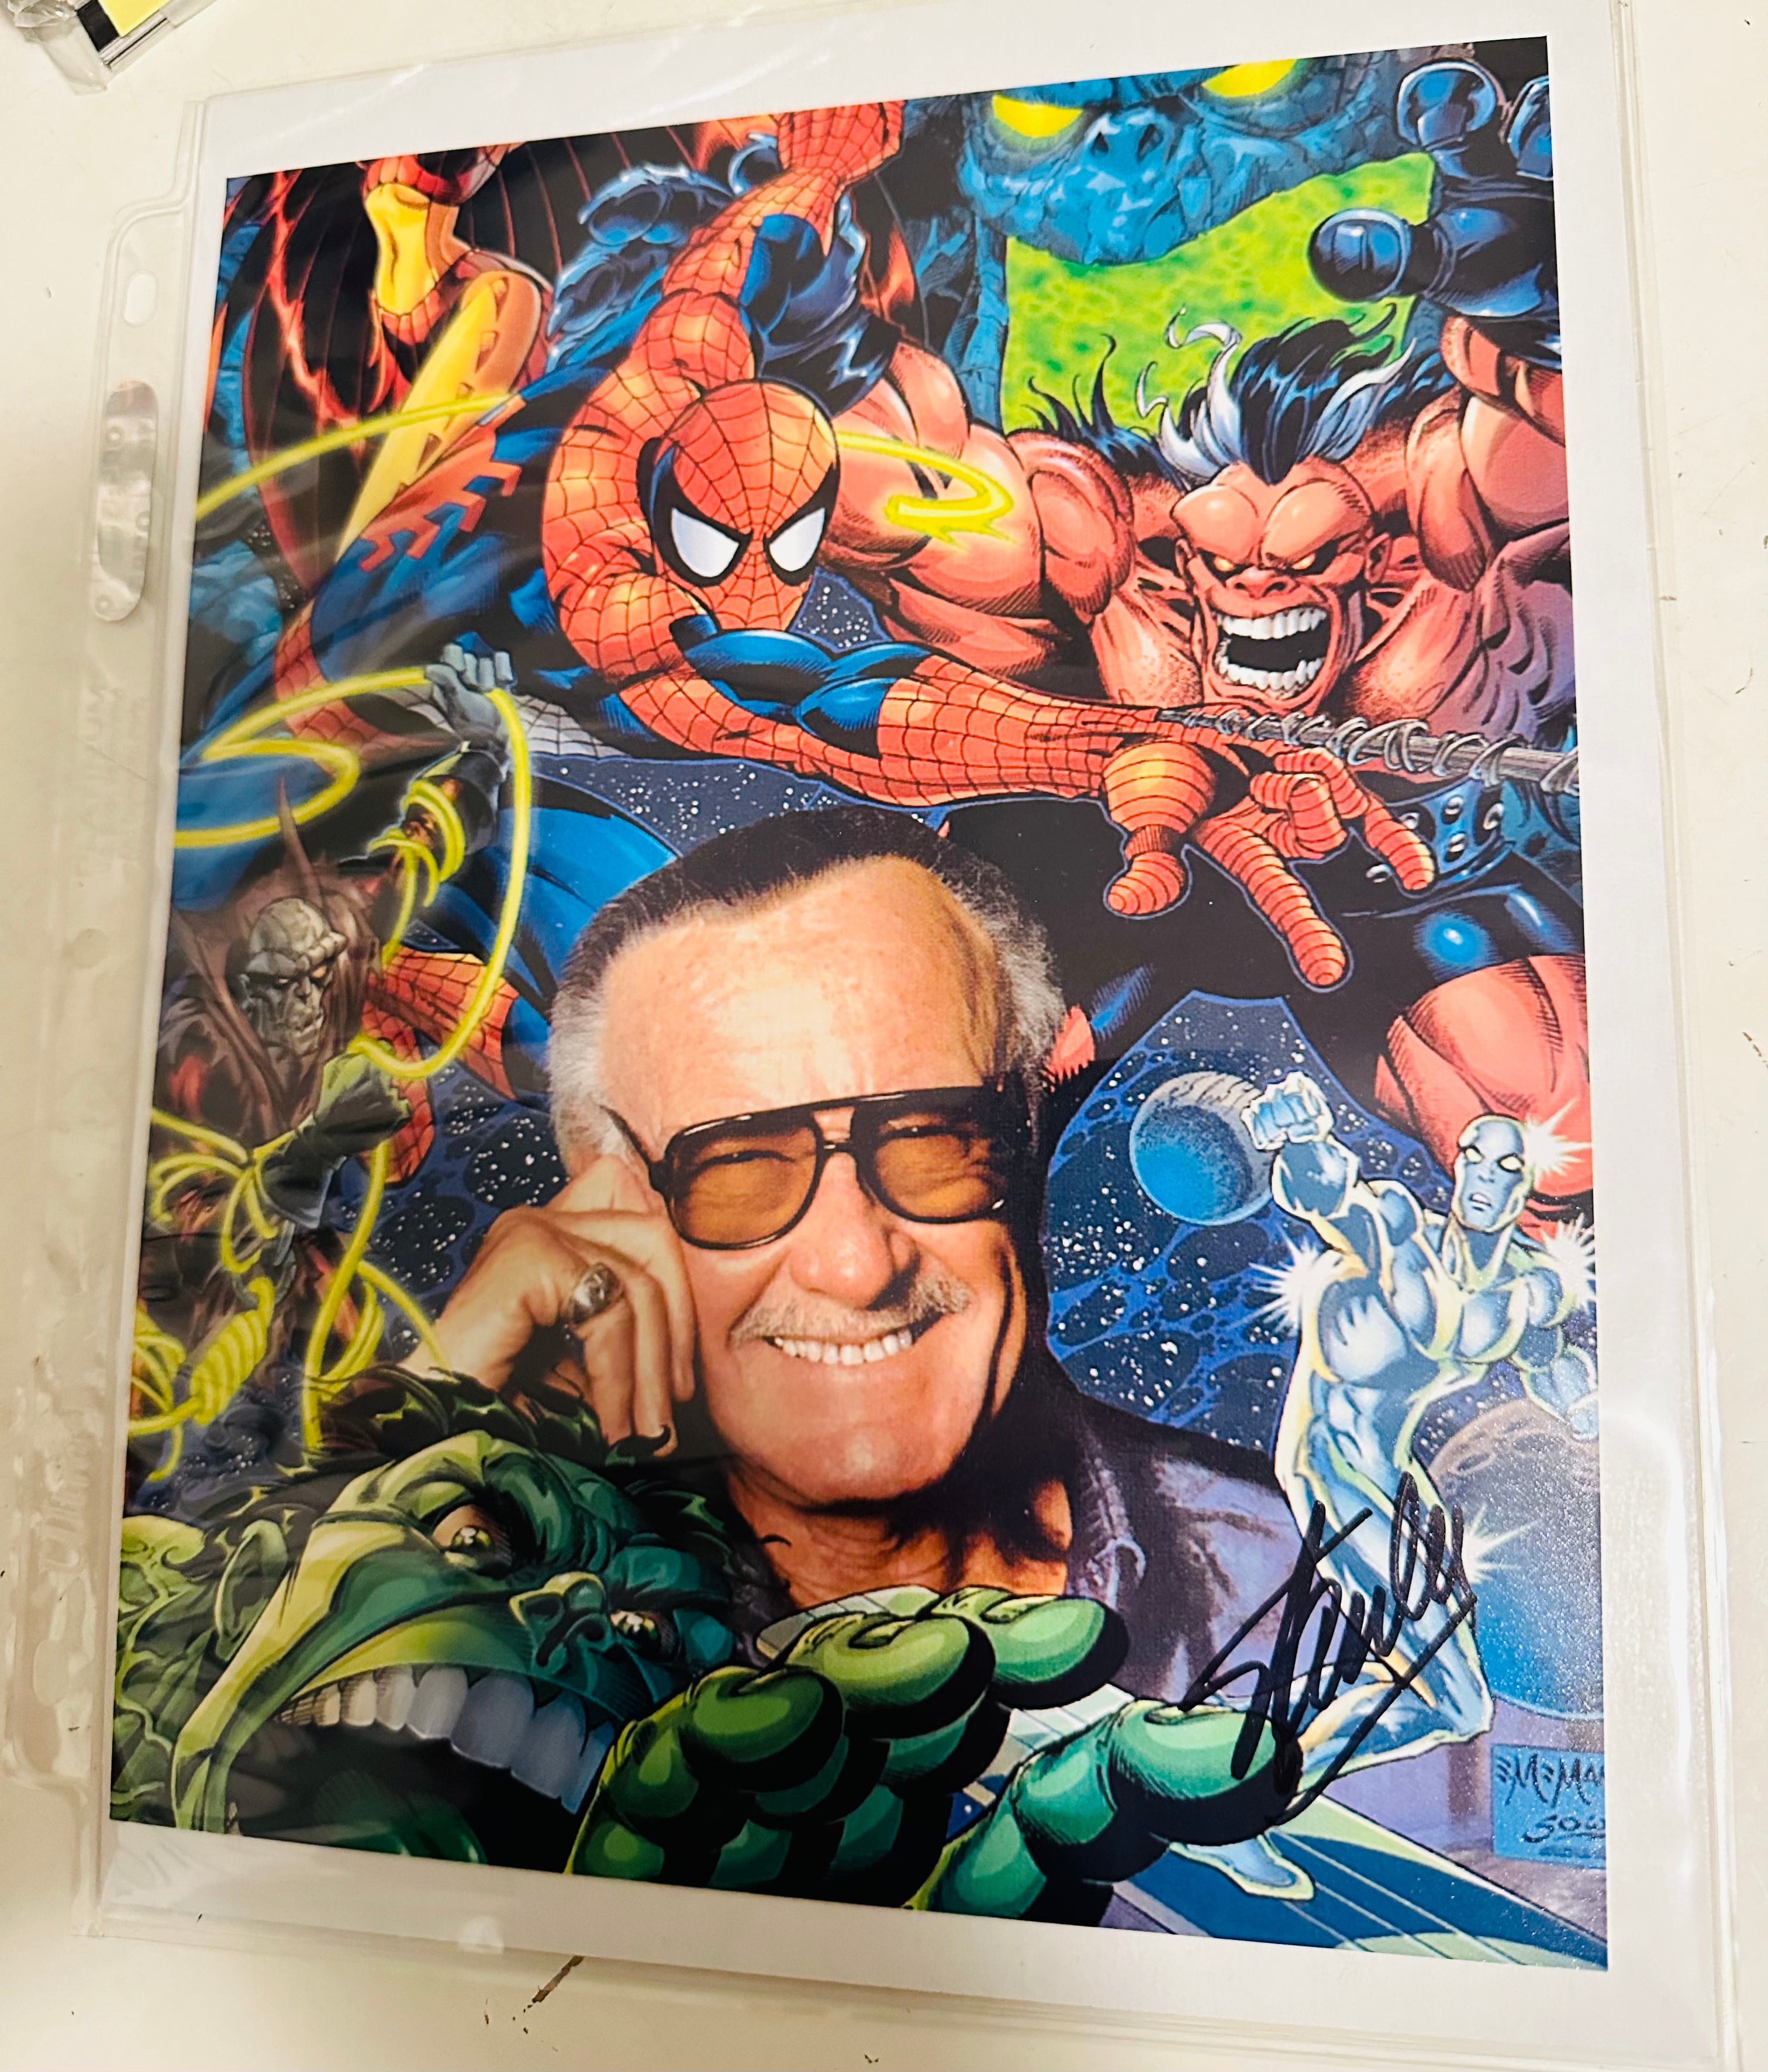 Marvel comics rare Stan Lee autograph in person 8x10 photo certified by Fanexpo